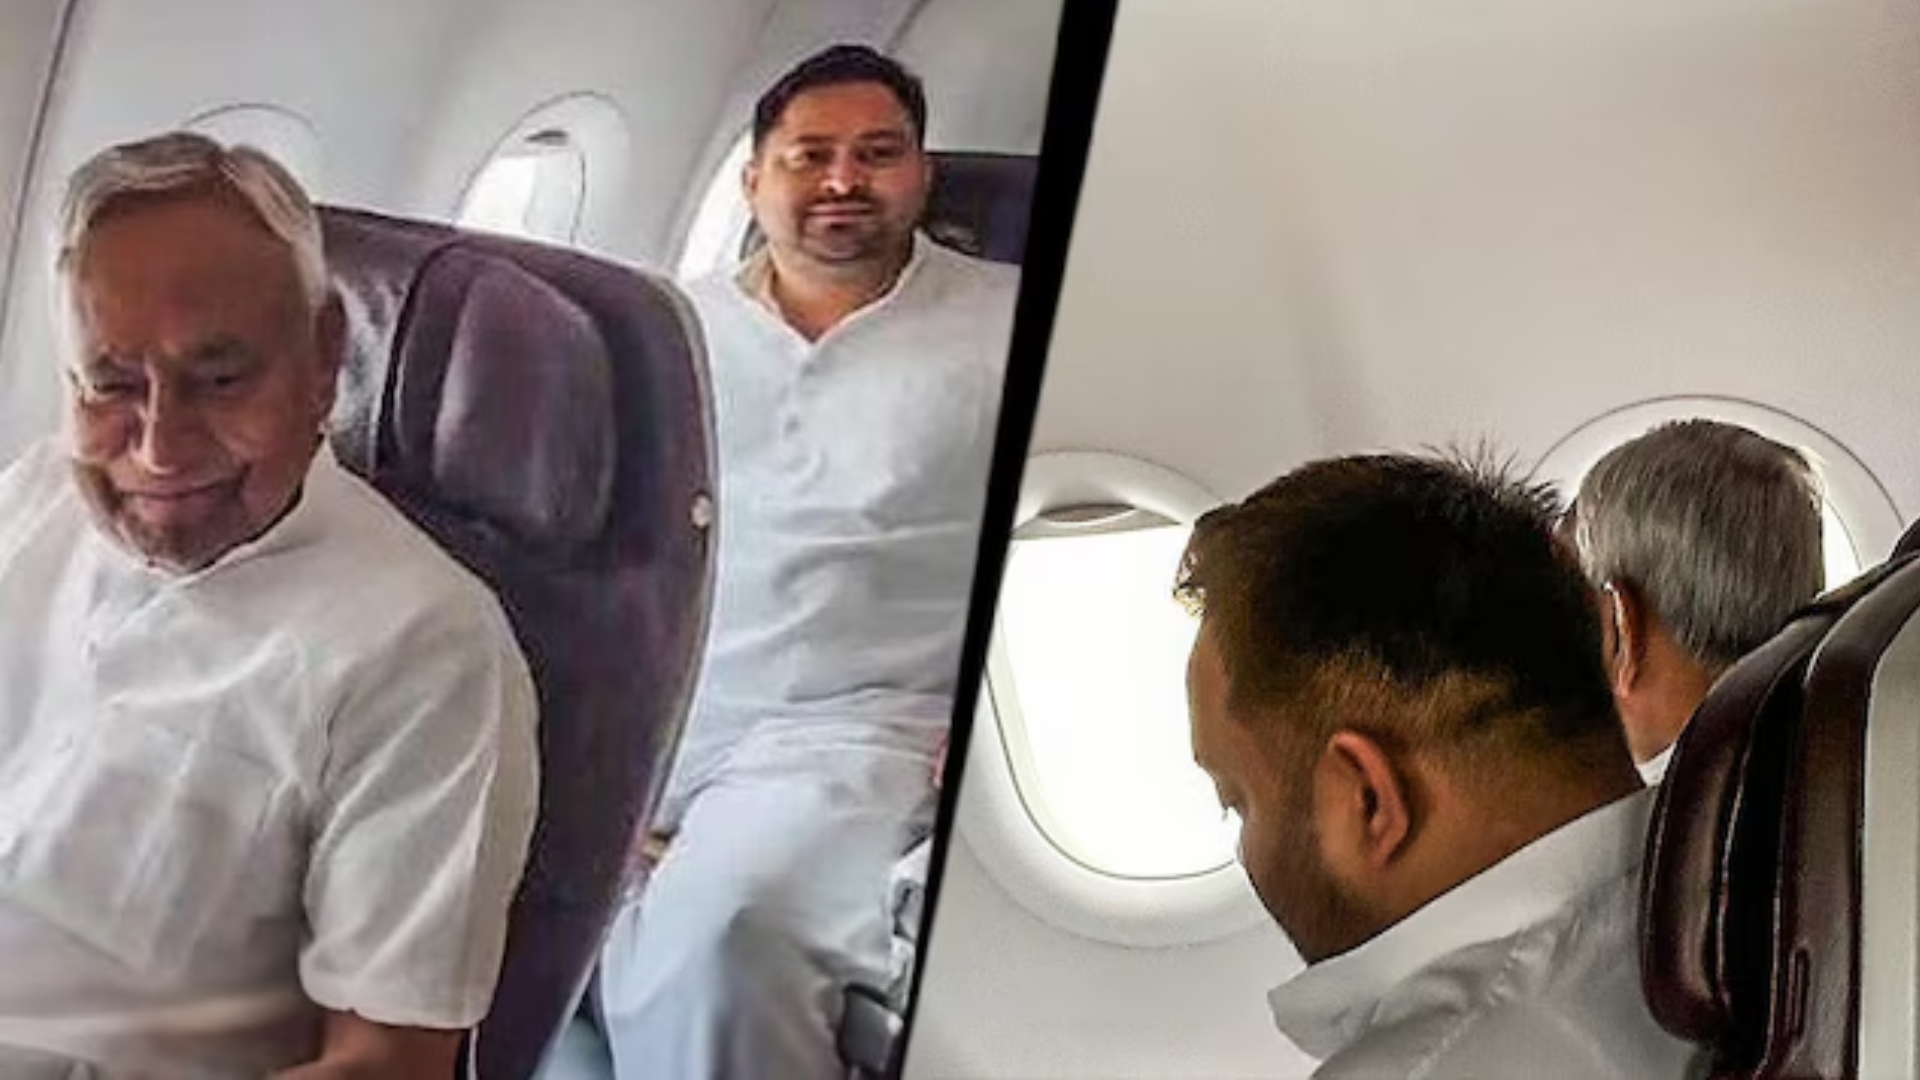 Tejaswi Yadav Urges People To ‘Wait And Watch’ After Sharing Seat With Nitish Kumar In Flight